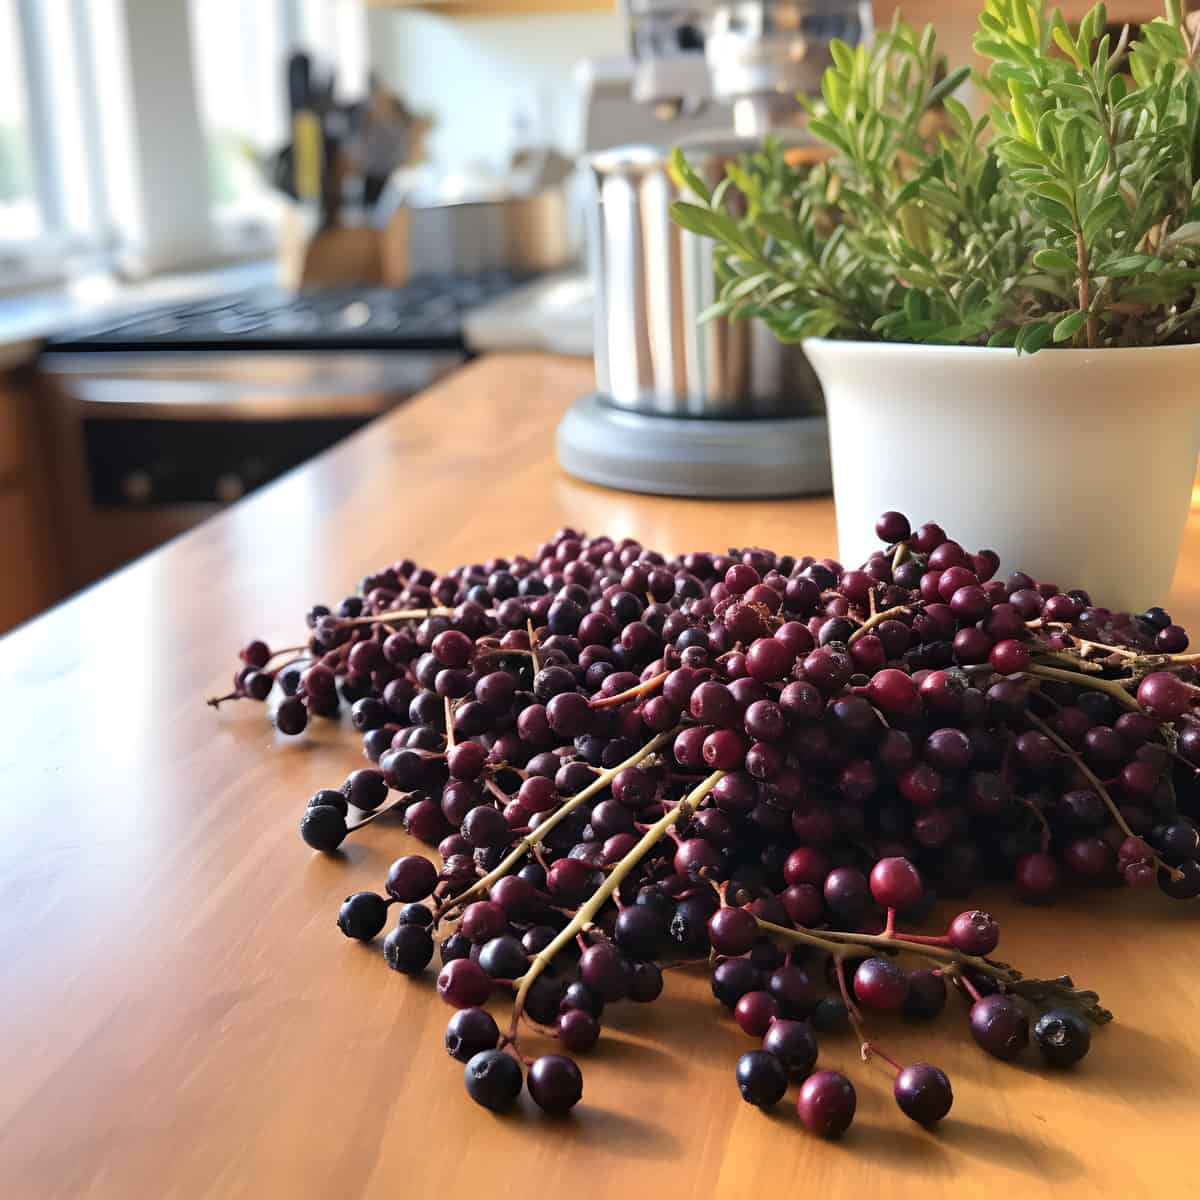 Crowberry on a kitchen counter